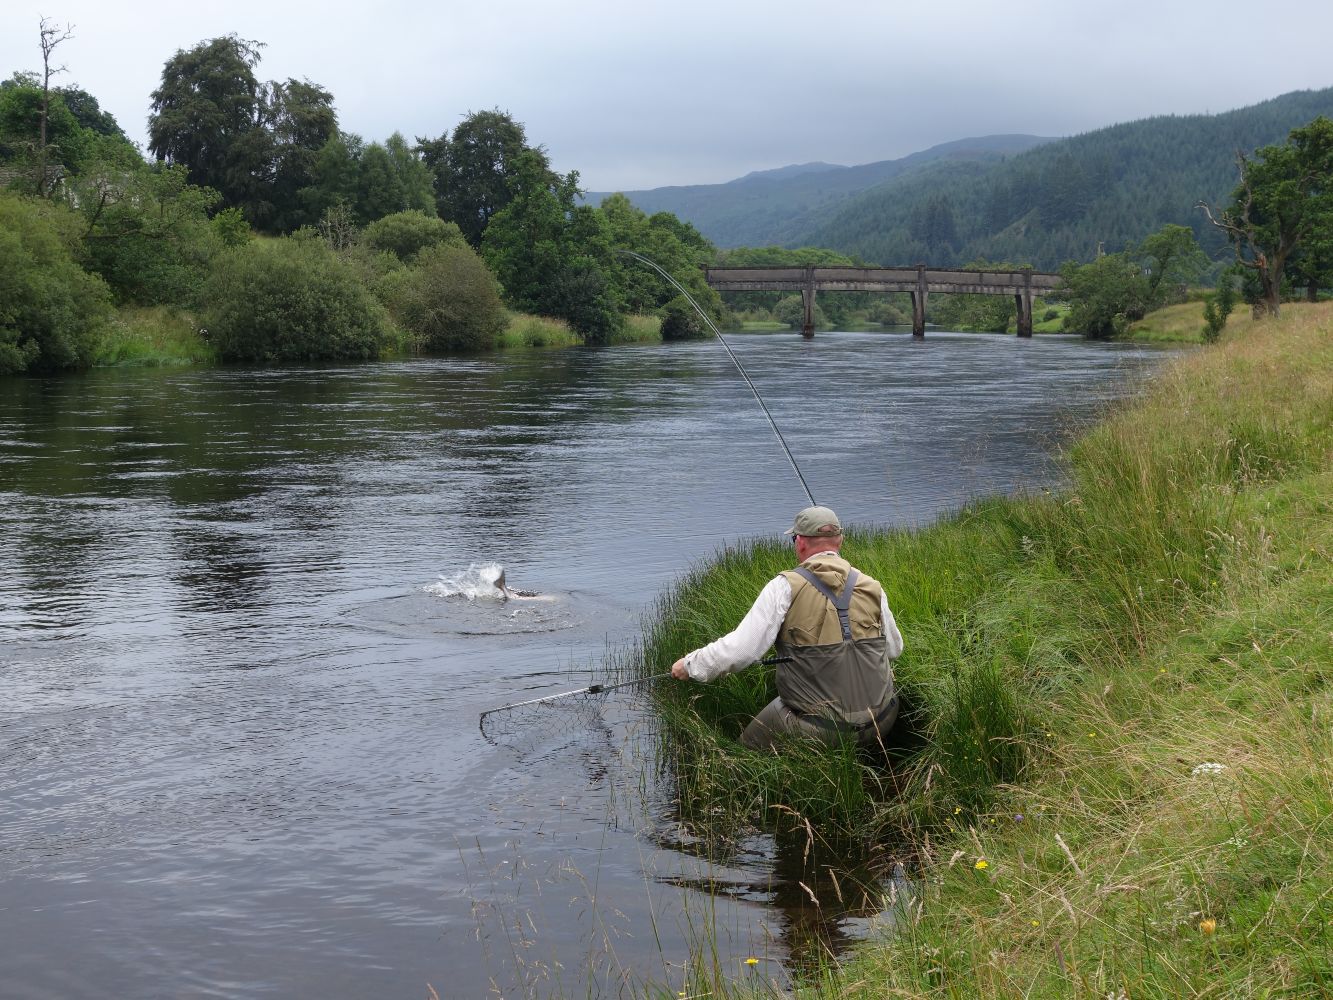 Fishing Holidays in Scotland near Inverness